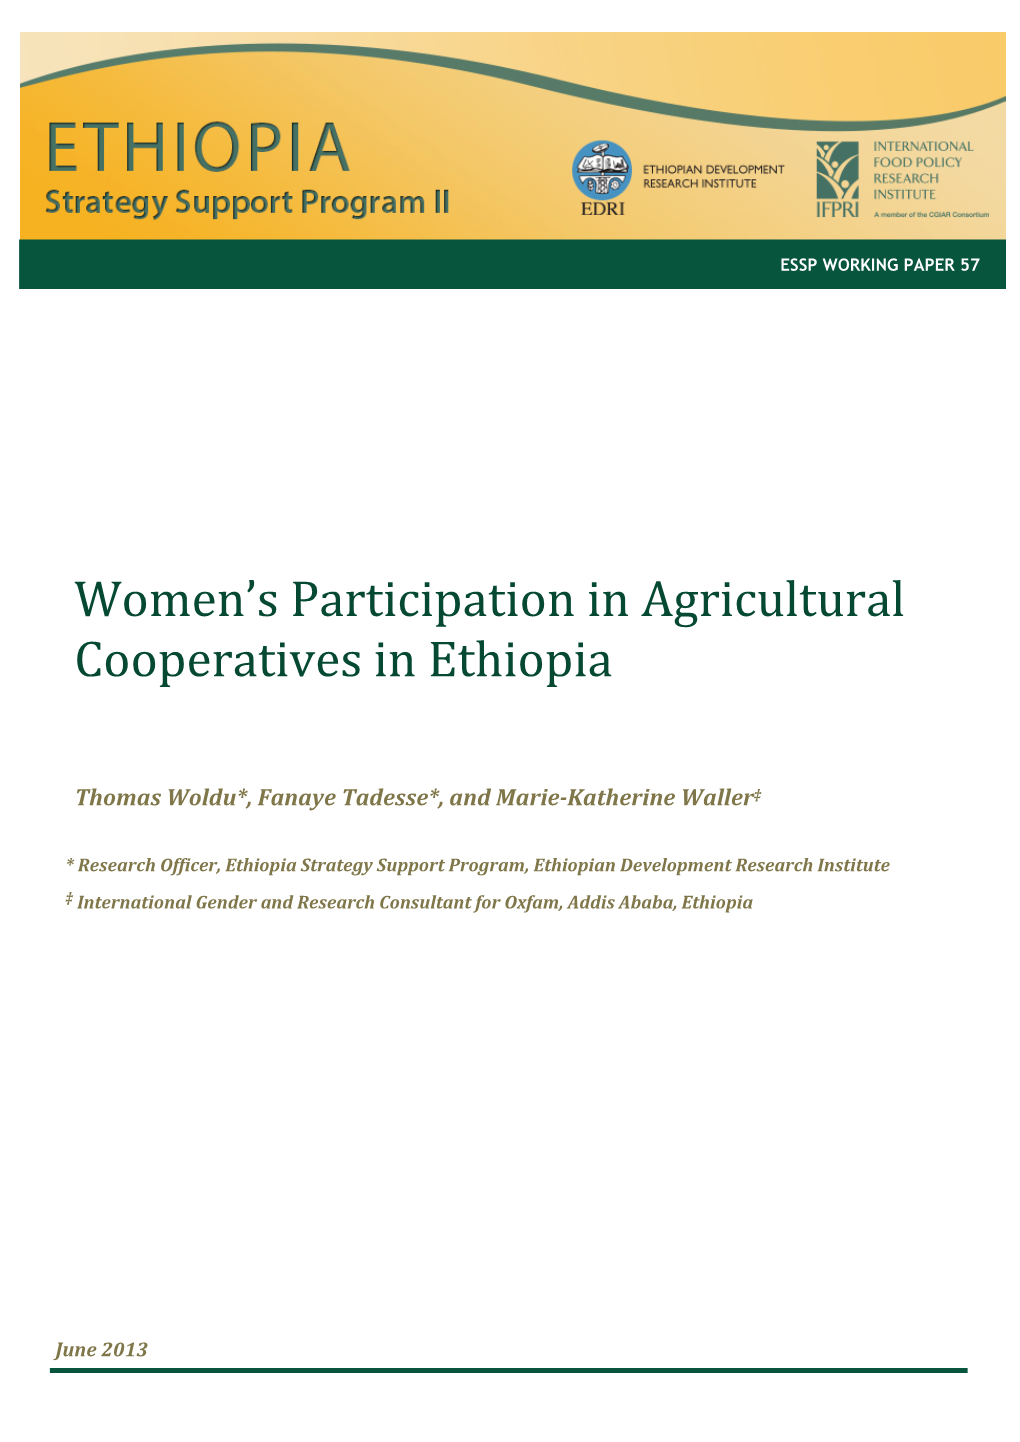 Women's Participation in Agricultural Cooperatives in Ethiopia